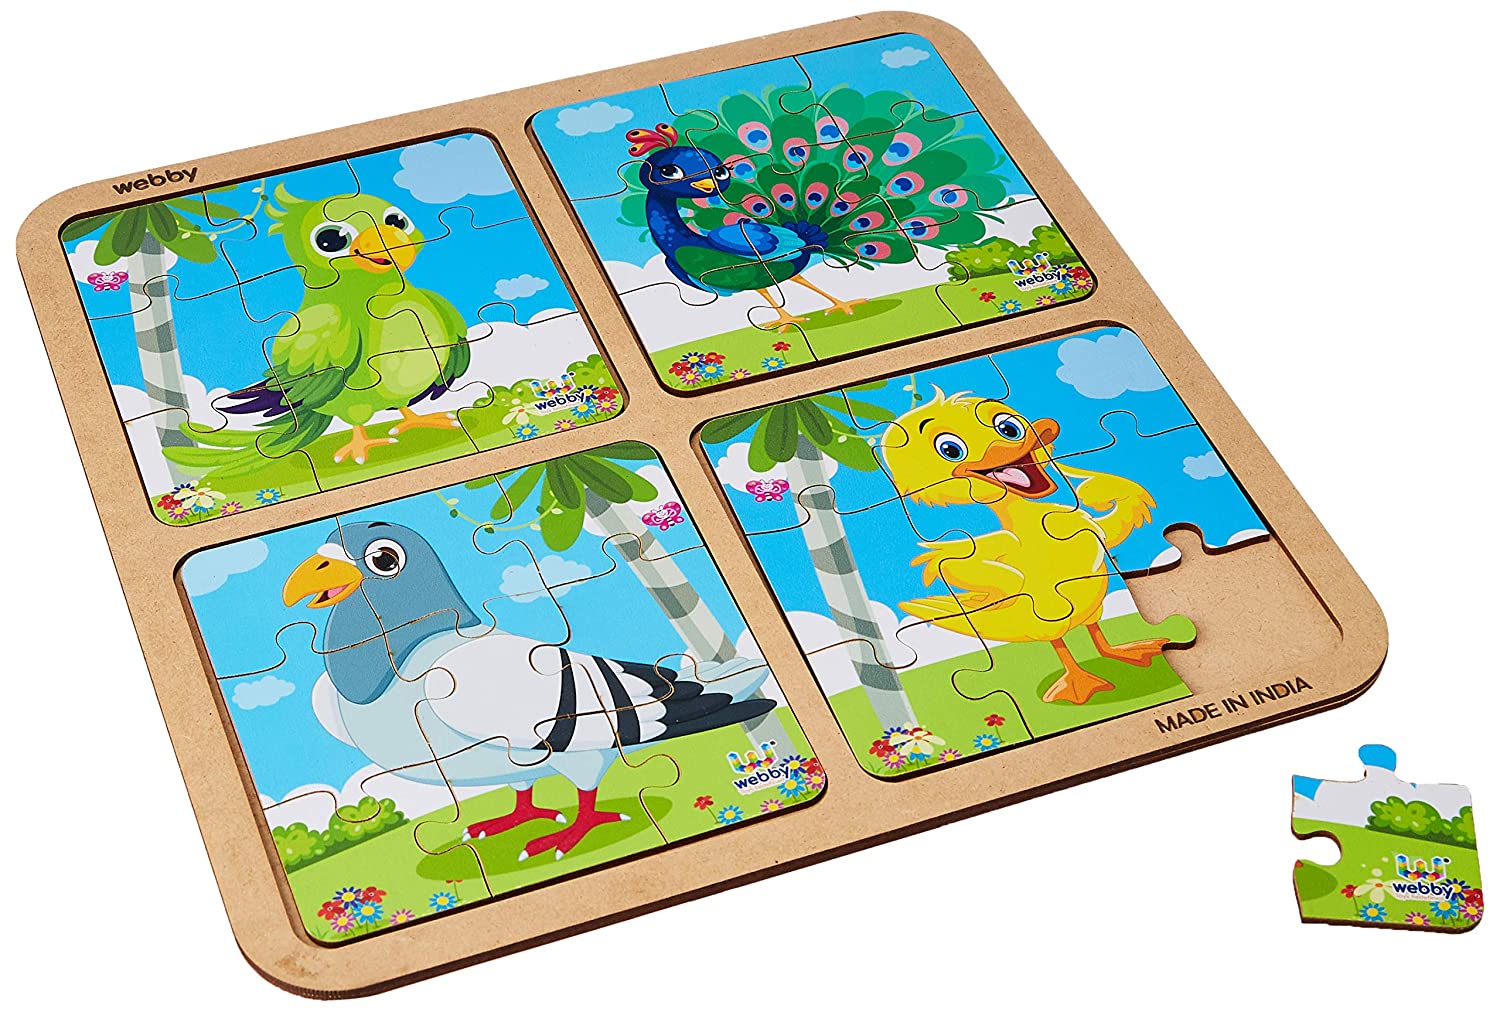 Webby 4 in 1 Wooden Birds Puzzle Toy, 36 Pcs – Webby Toys